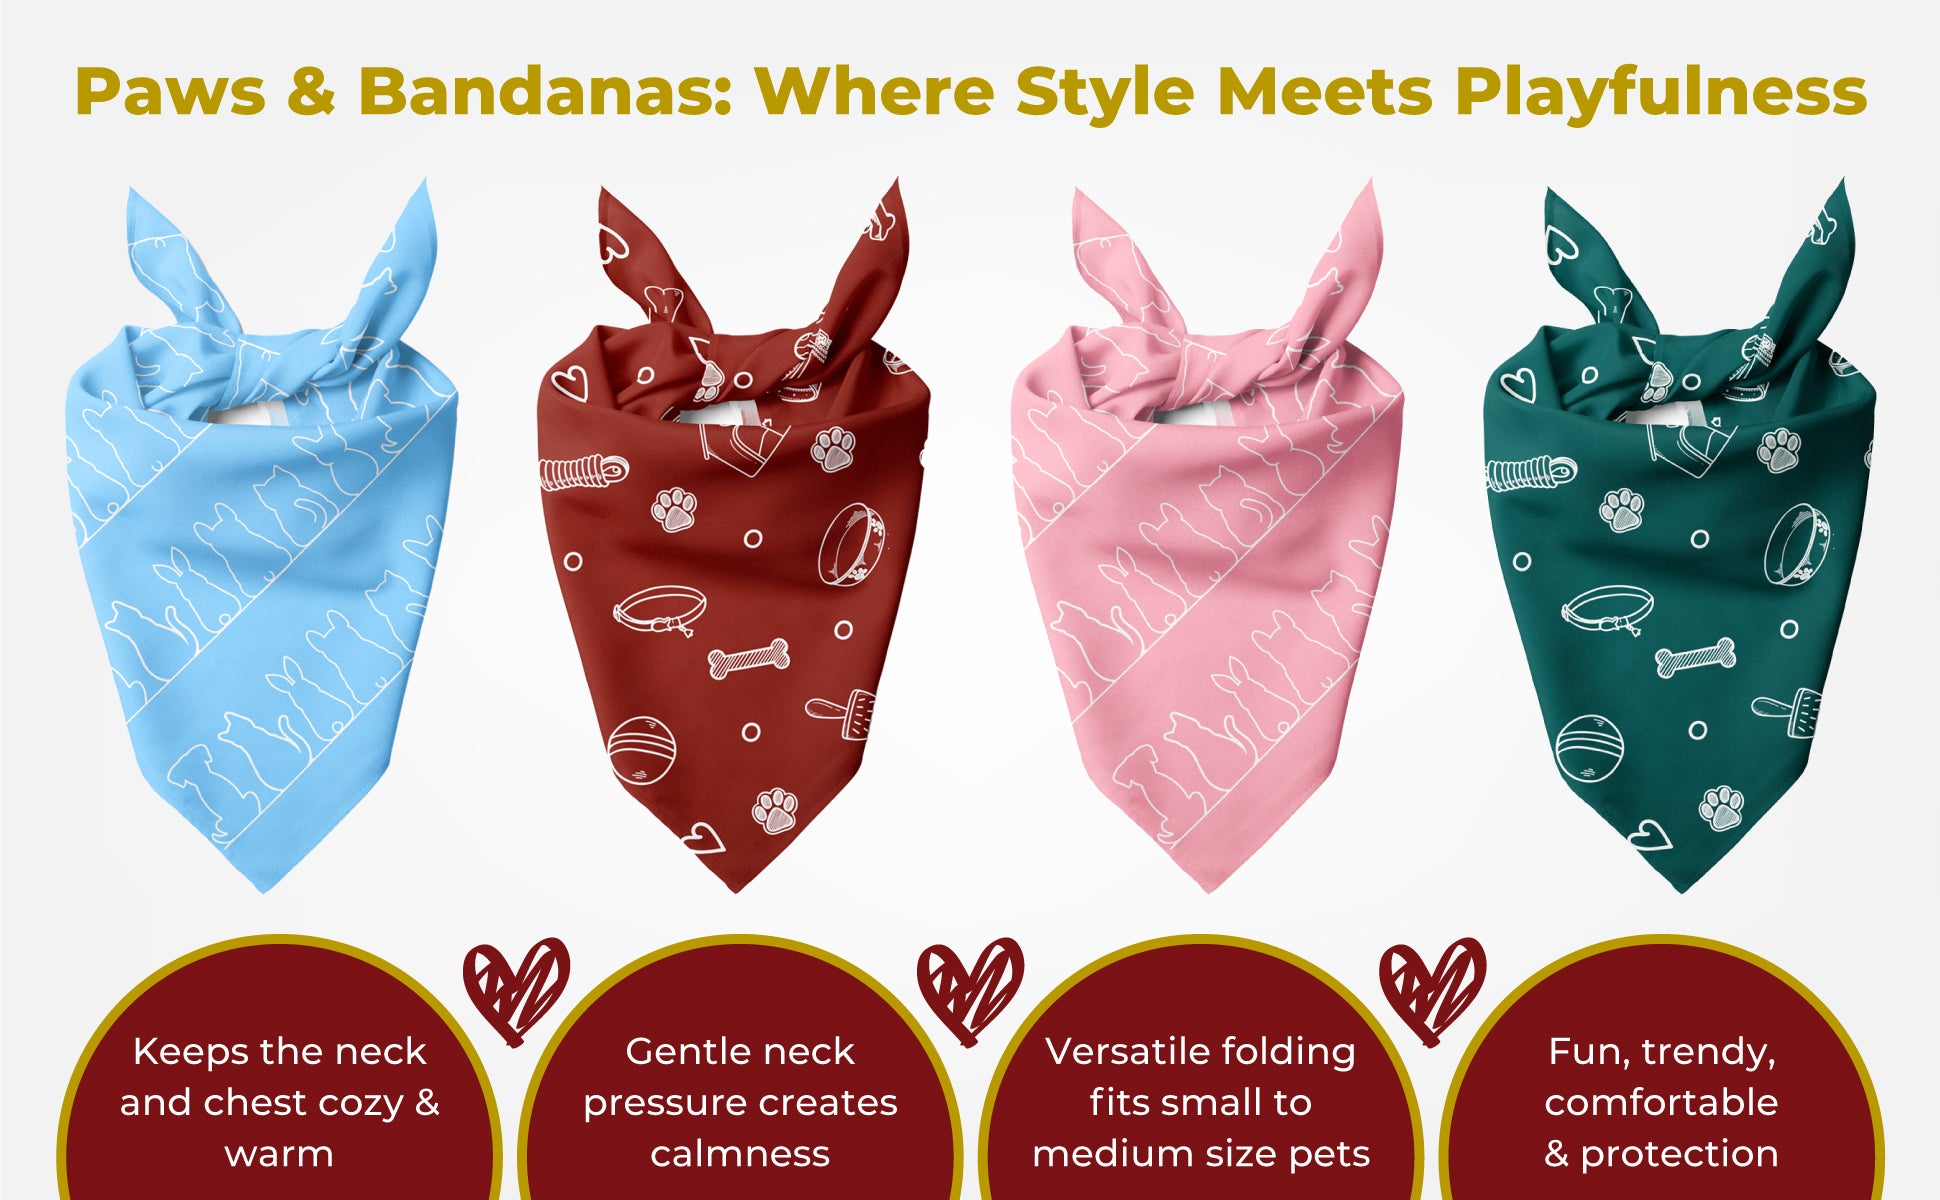 dog bandana scarf fashion outfit cat bunny puppy pink red blue green unisex neutral paws style puppy essentials list heat cold cat  bunny gift set essentials basket starter kit dog toys for aggressive chewers large breed dog essentials tug of war dog toy dog teeth cleaning chews durable dog toys cute gifts dog ball launcher balls for dogs red bandana scarf  birthday xmas christmas outfit red pink blue green dog interactive toys travel accessories amazon finds puppies accesorios para perros